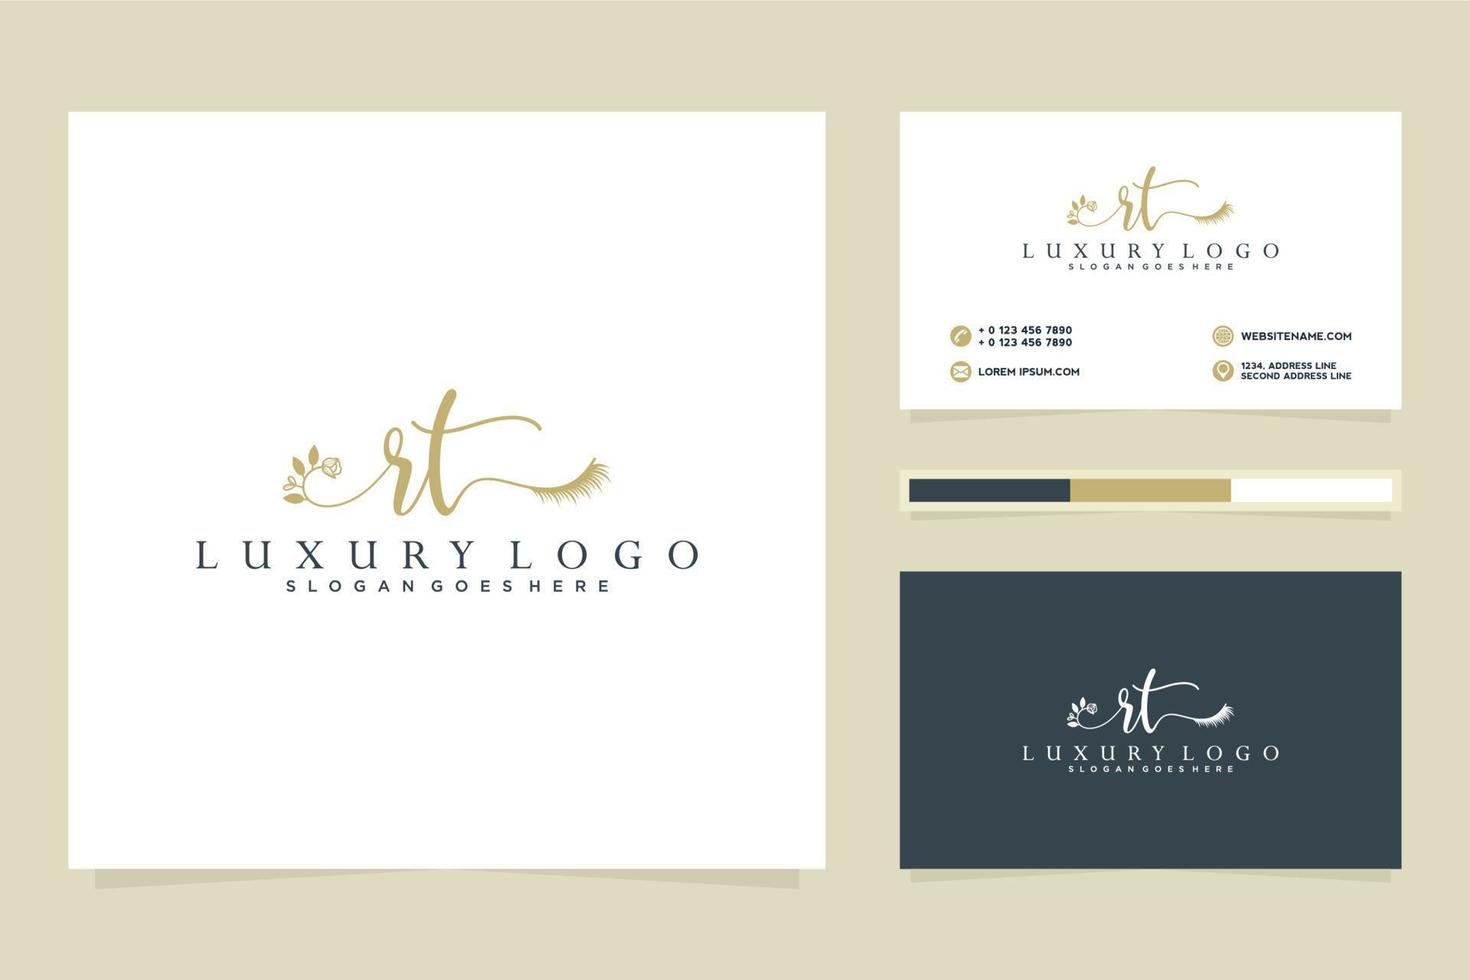 Initial RT Feminine logo collections and business card template Premium Vector